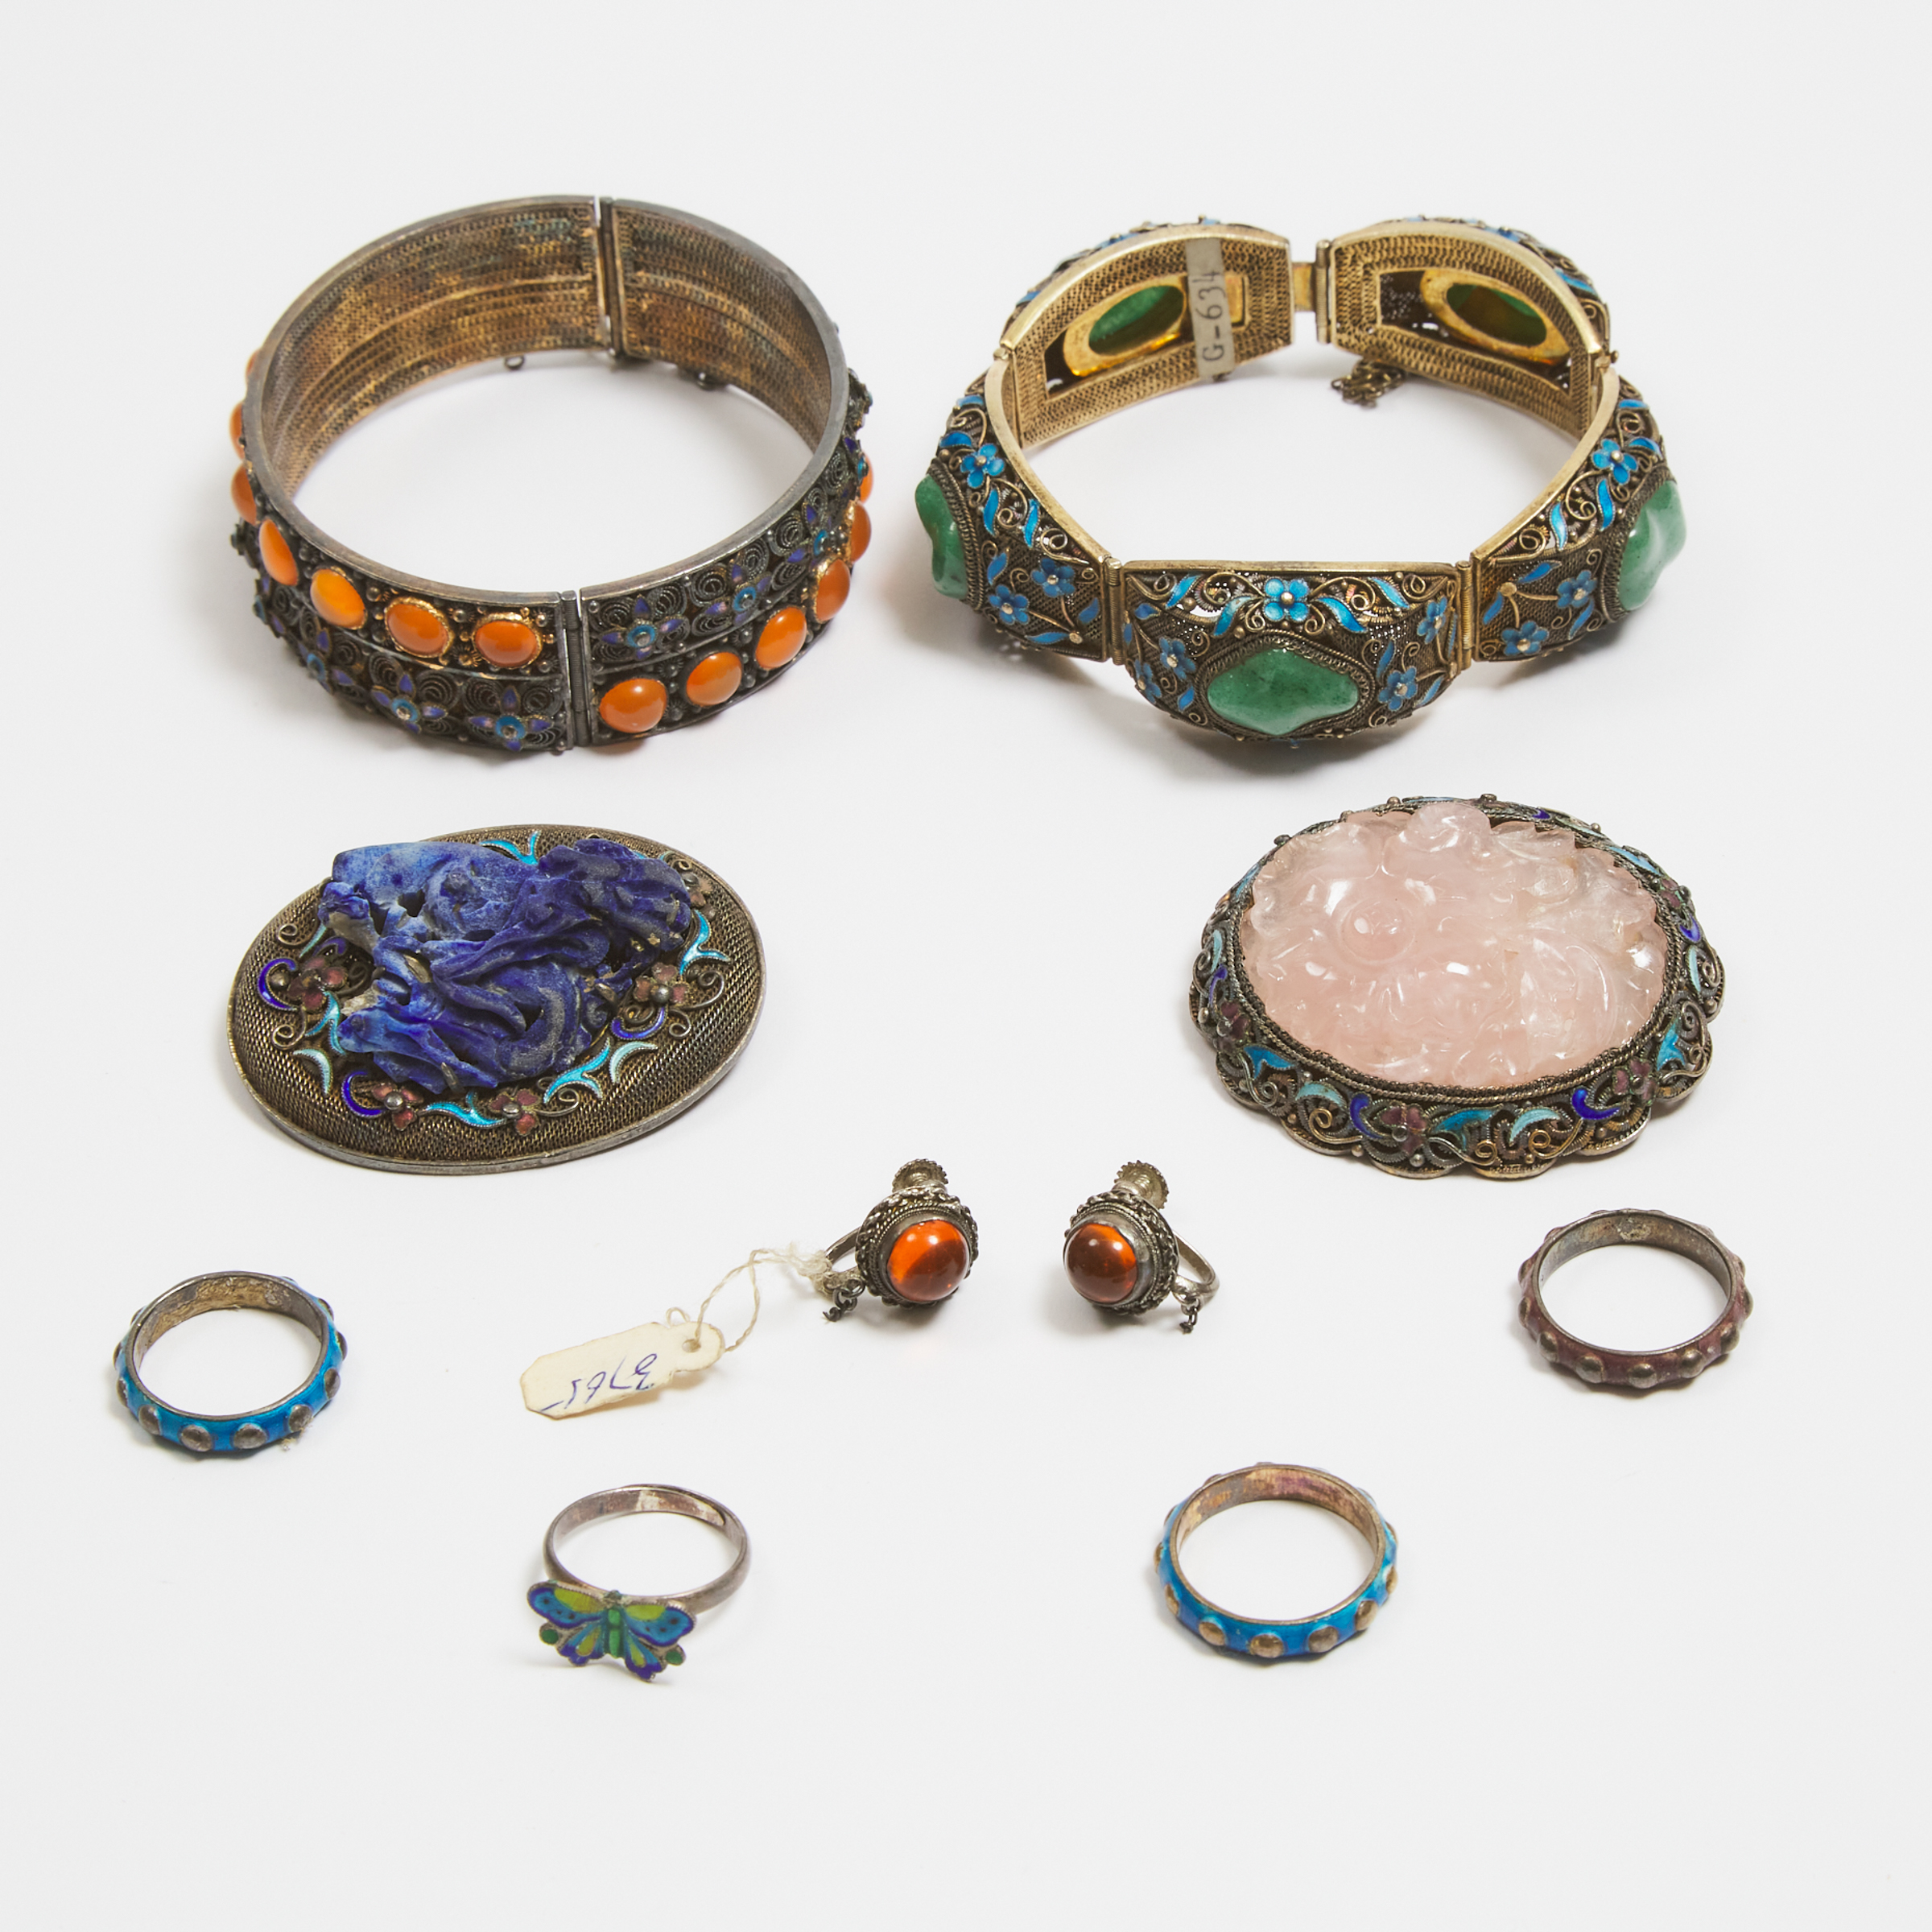 A Group of Ten Chinese Silver Enameled Filigree Jewellery Pieces, Republican Period